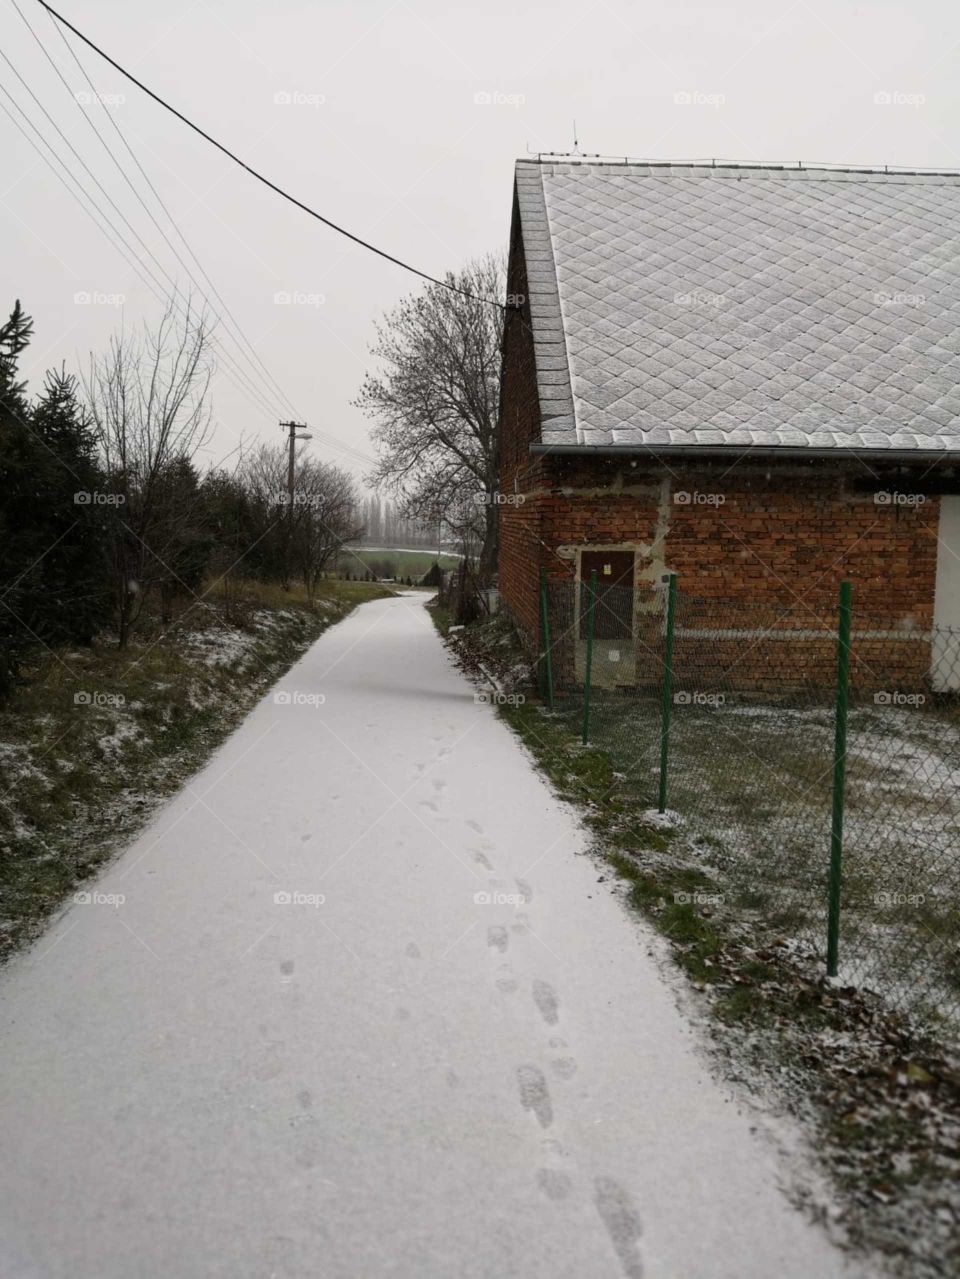 Beginning of winter in the Czech republic with snow